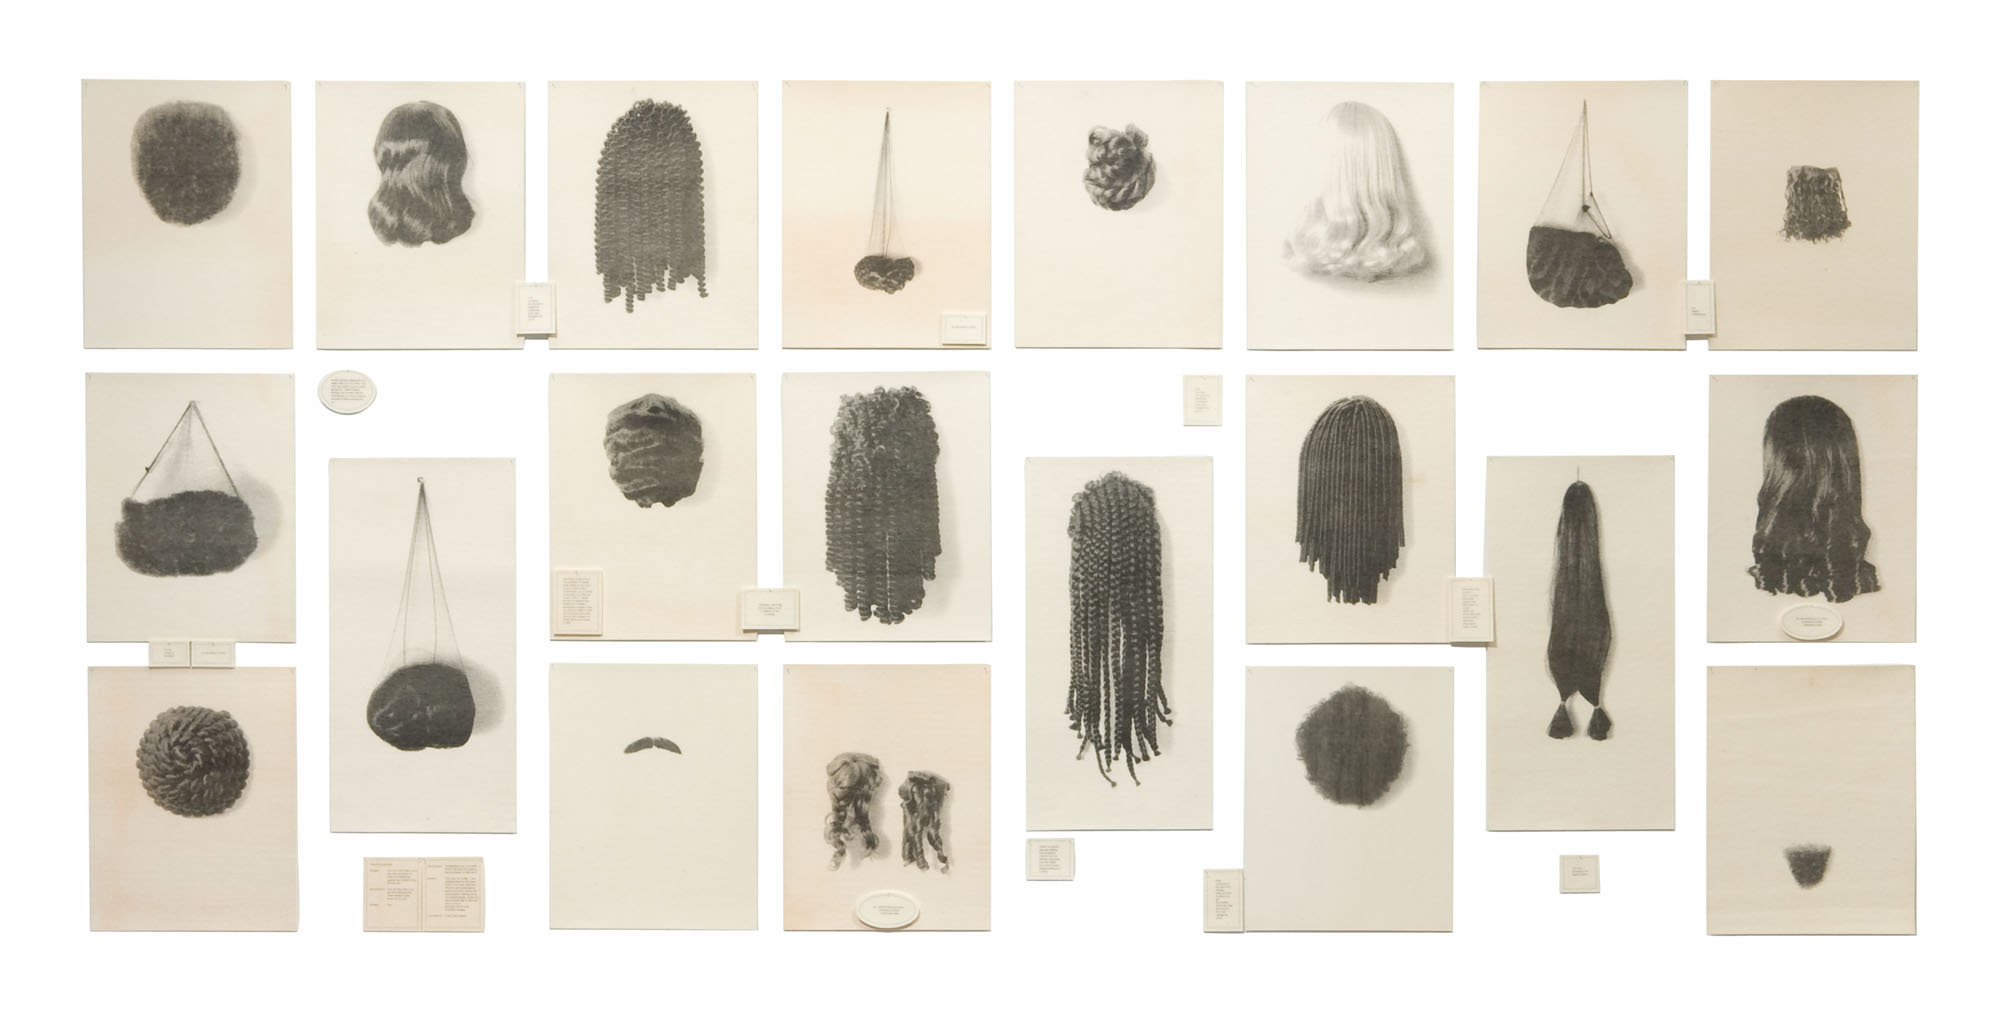 black and white photos of wigs in various shapes and sizes